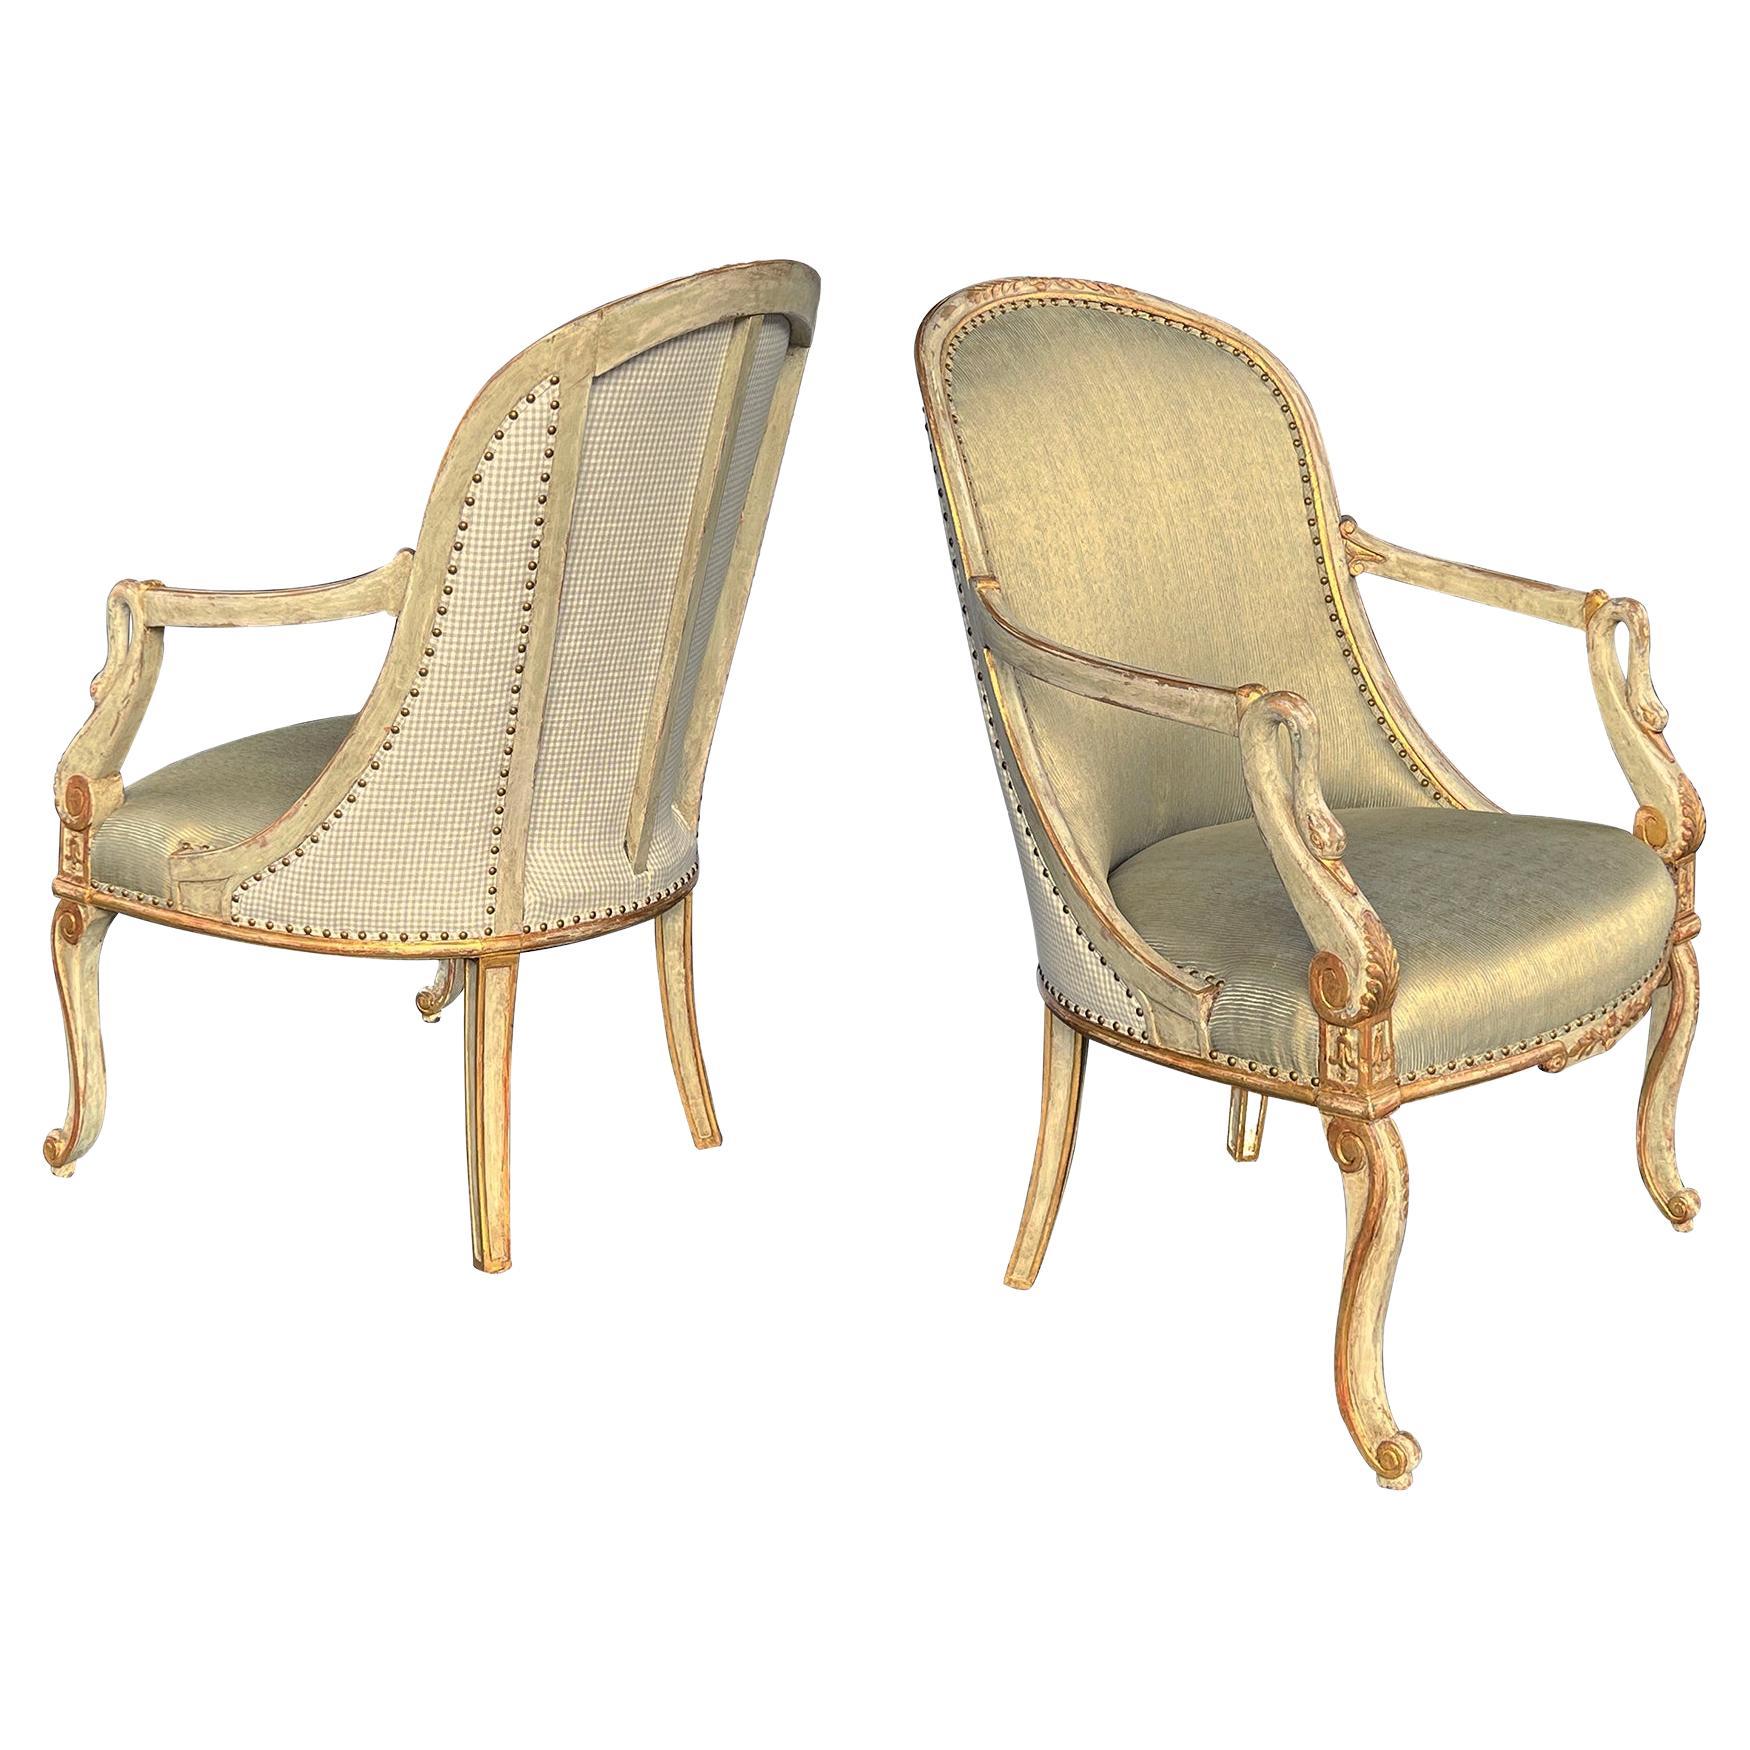 An Elegant Pair Italian Empire Pale-green Painted and Parcel-gilt Armchairs